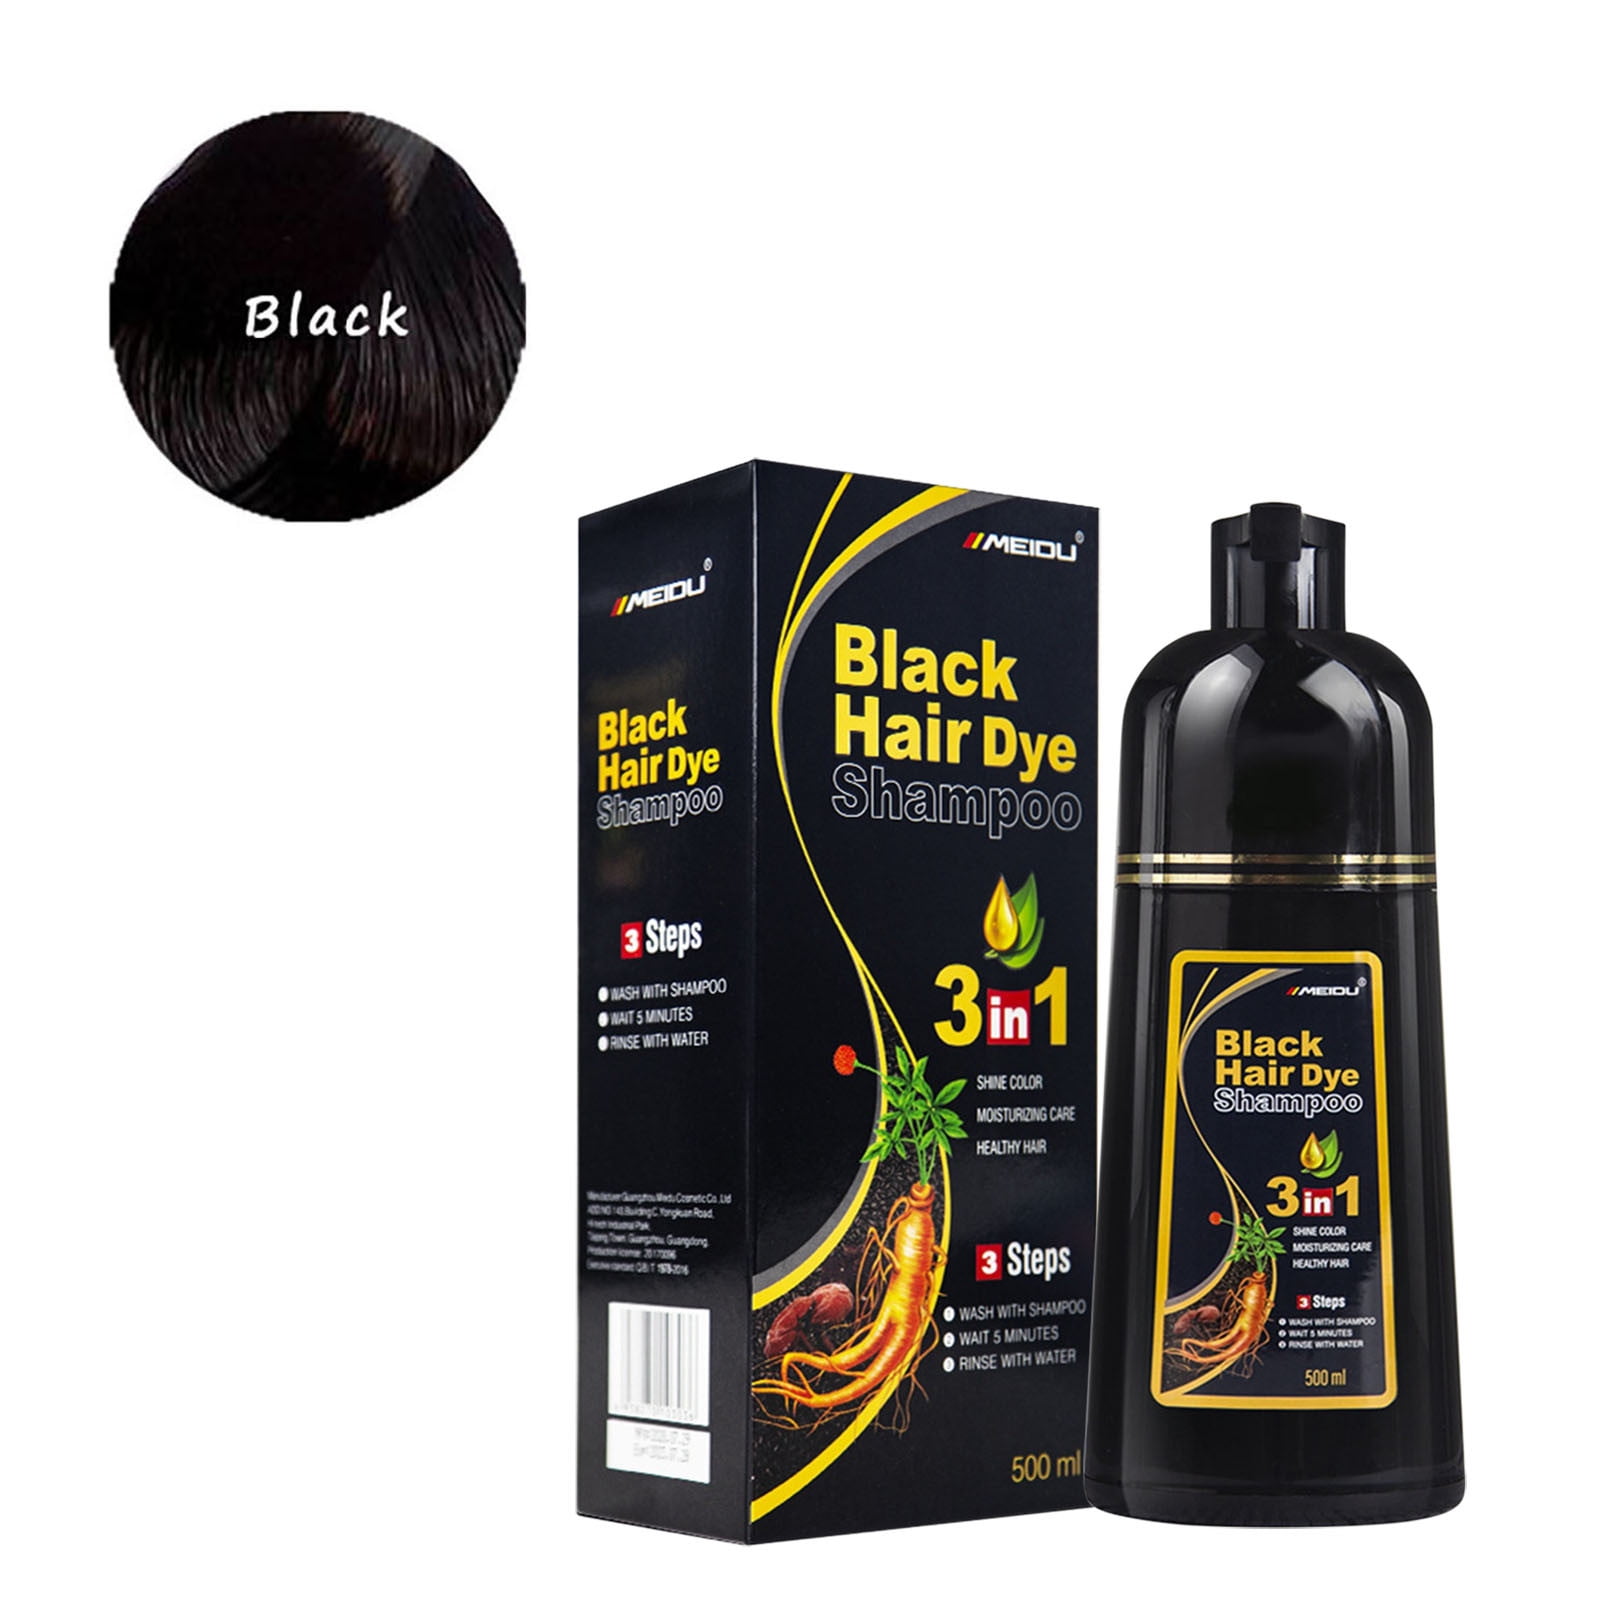 Buy shopping store Maxxpro Herbal Hair Darkening Shampoo Instant Black In 5  Minutes Natural  Hair Color Black Online  599 from ShopClues